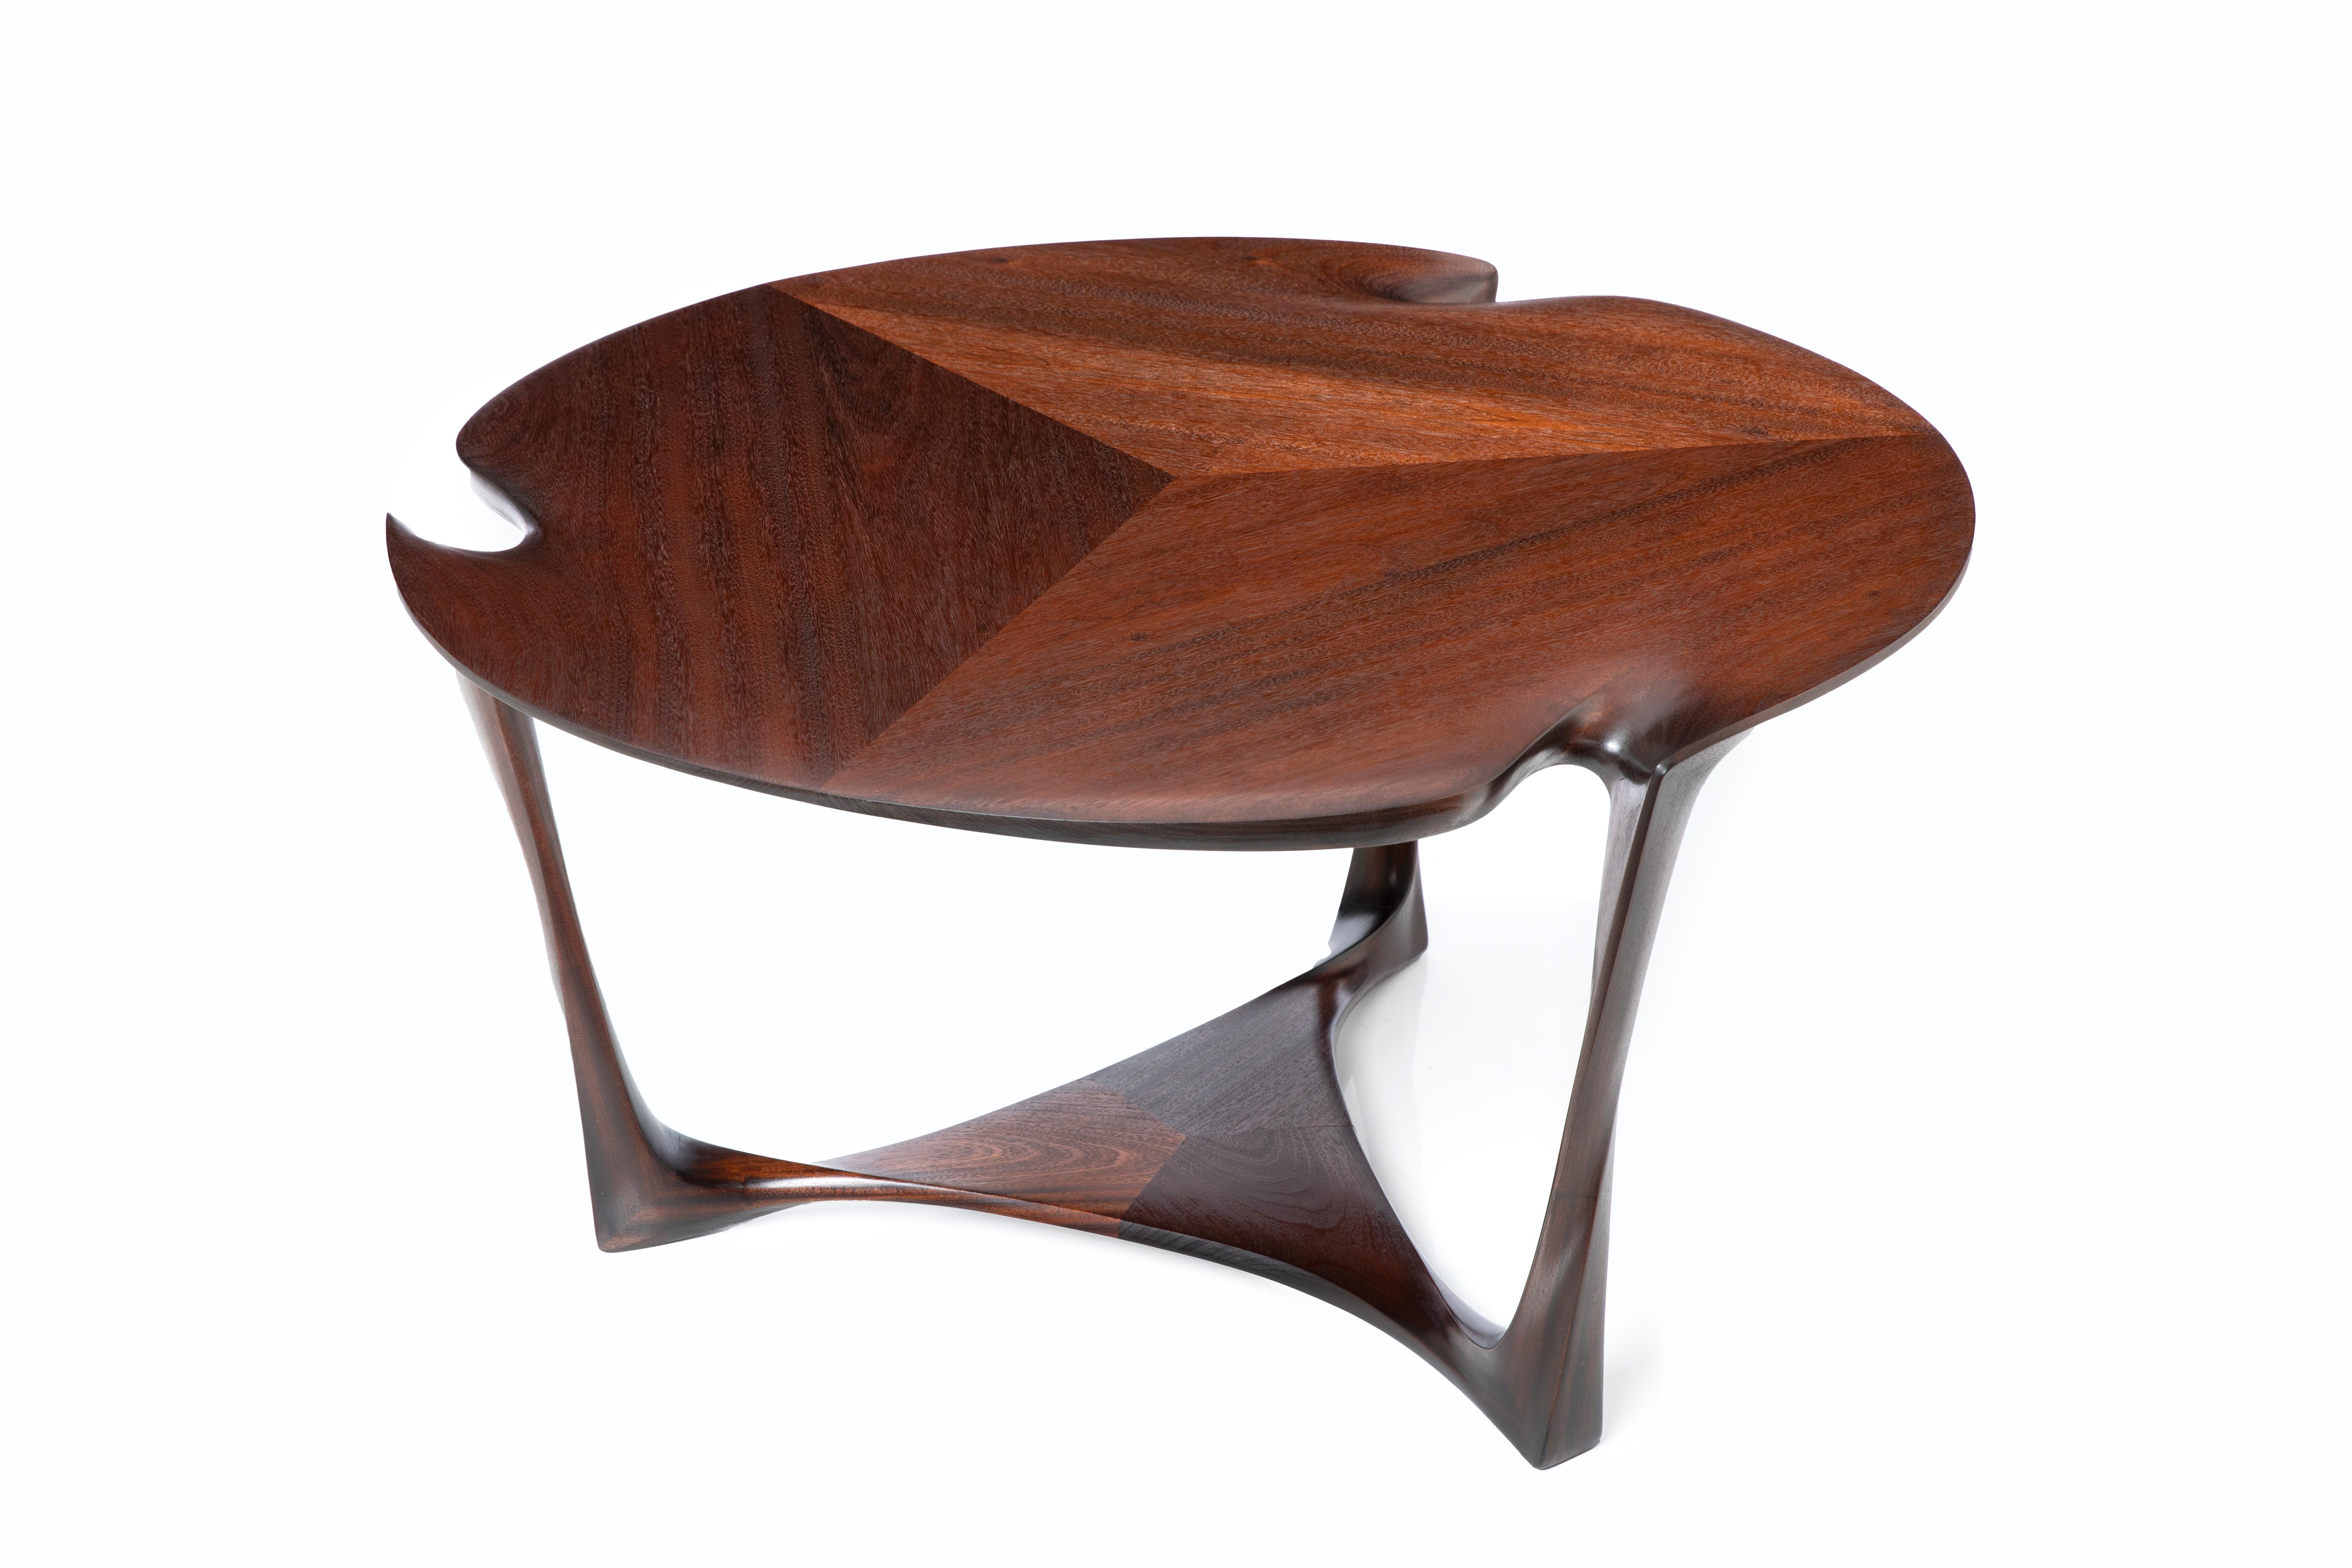 American ANTONI TABLE A Modern take on Art Nouveau. Sloping legs, Carved, Collectible. For Sale